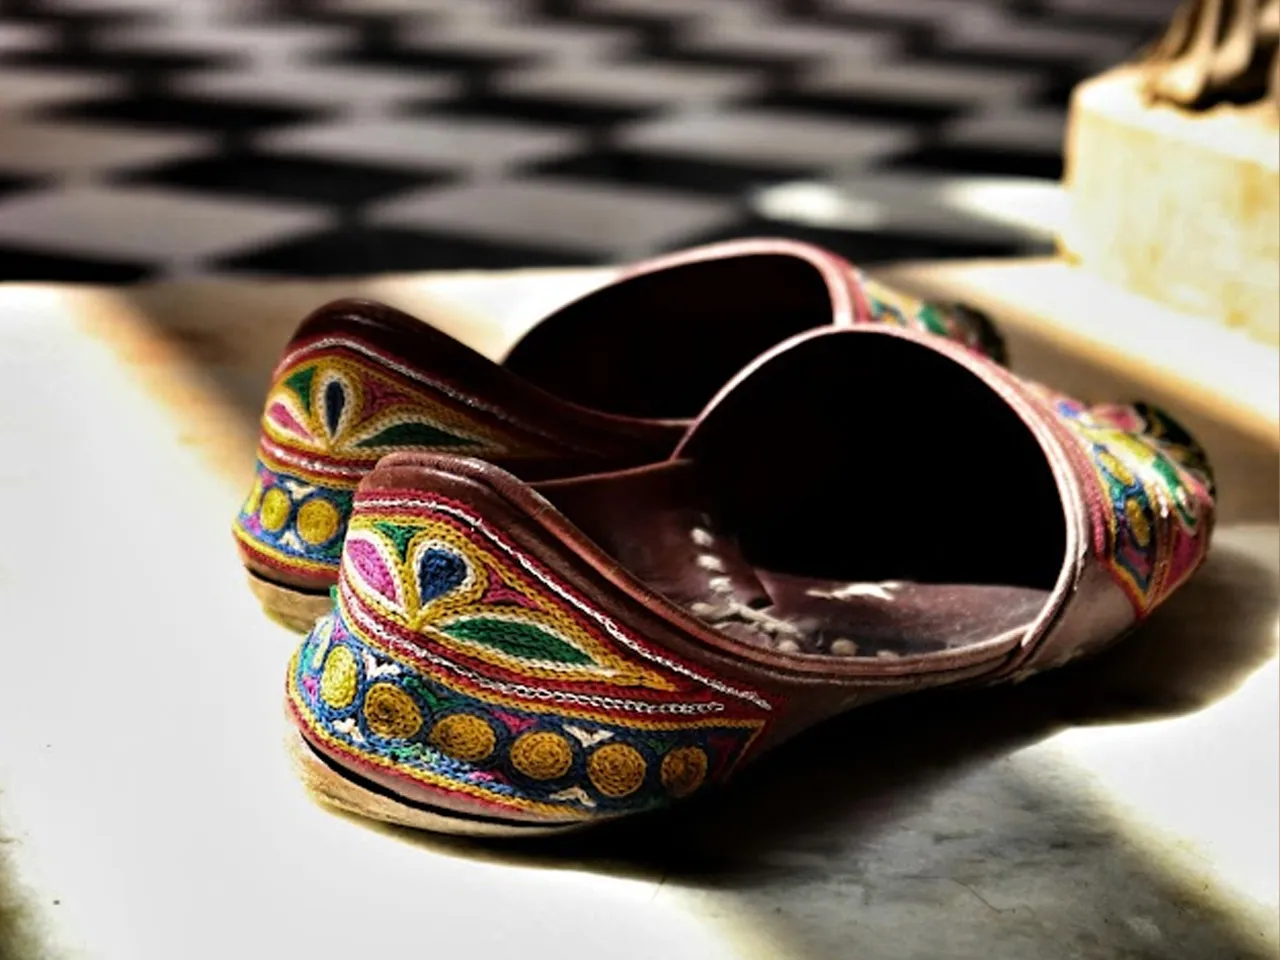 Walk Through The Cultural Exploration of Traditional Indian Footwear Styles